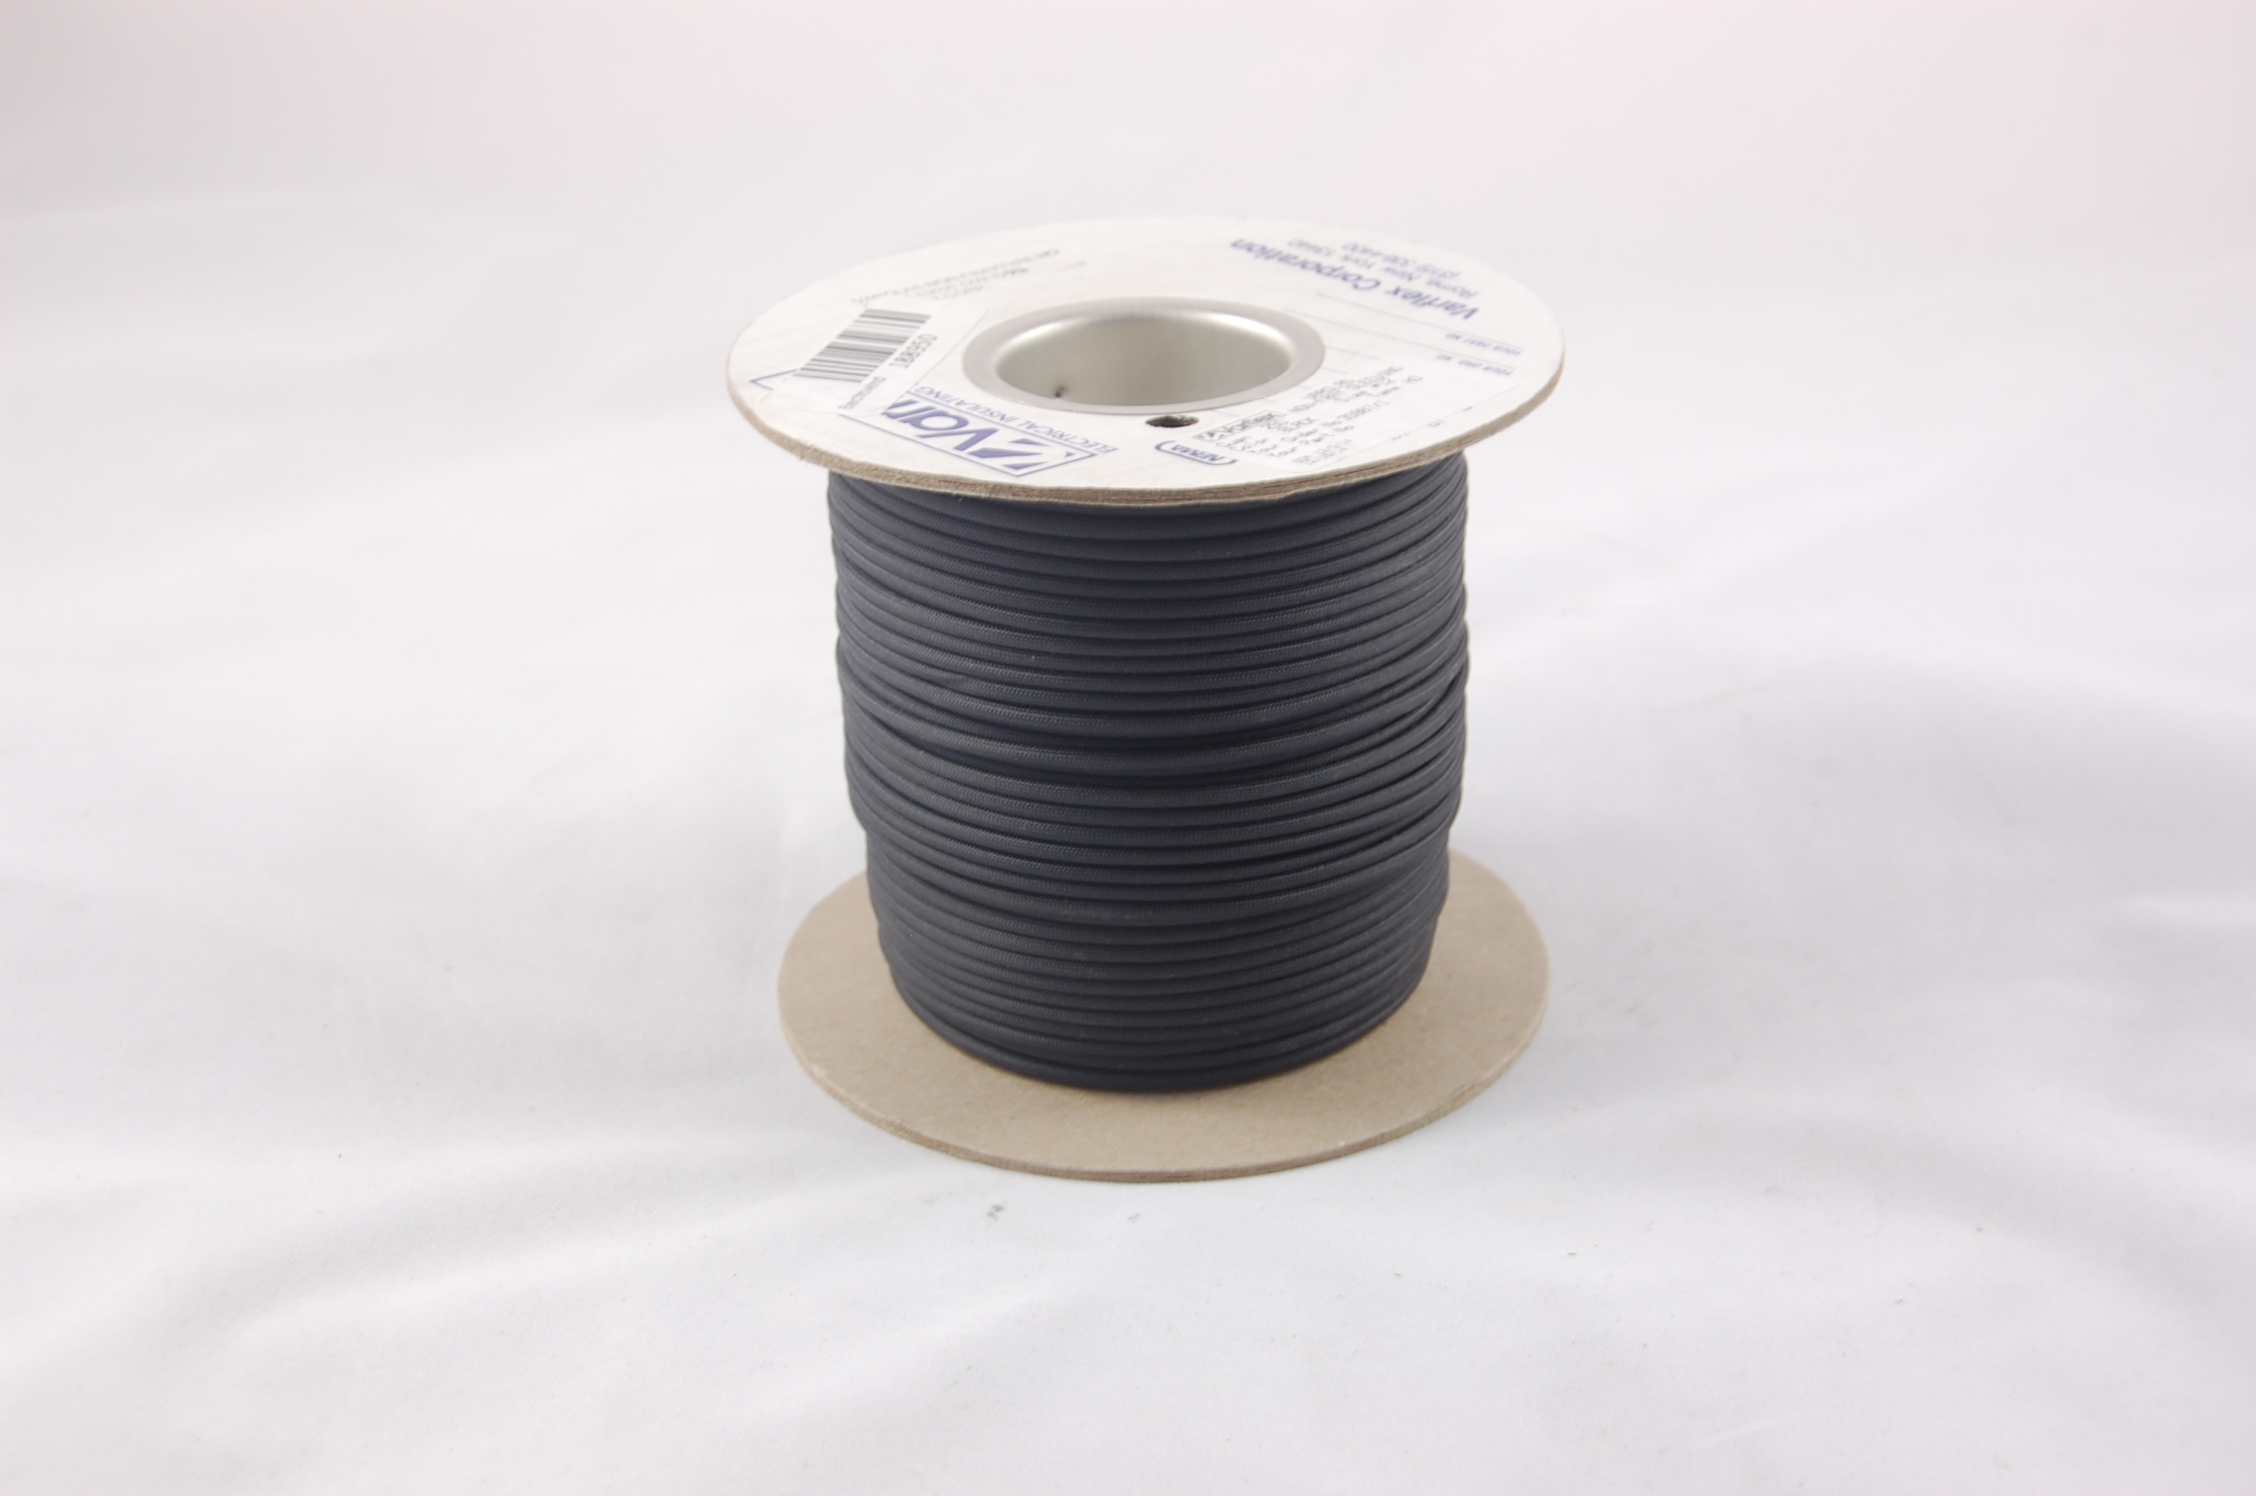 #20 AWG Varglas Type HO Heat-Cleaned and Treated High Temperature Non-Fray Flexible Fiberglass Sleeving , black, 500 FT per spool